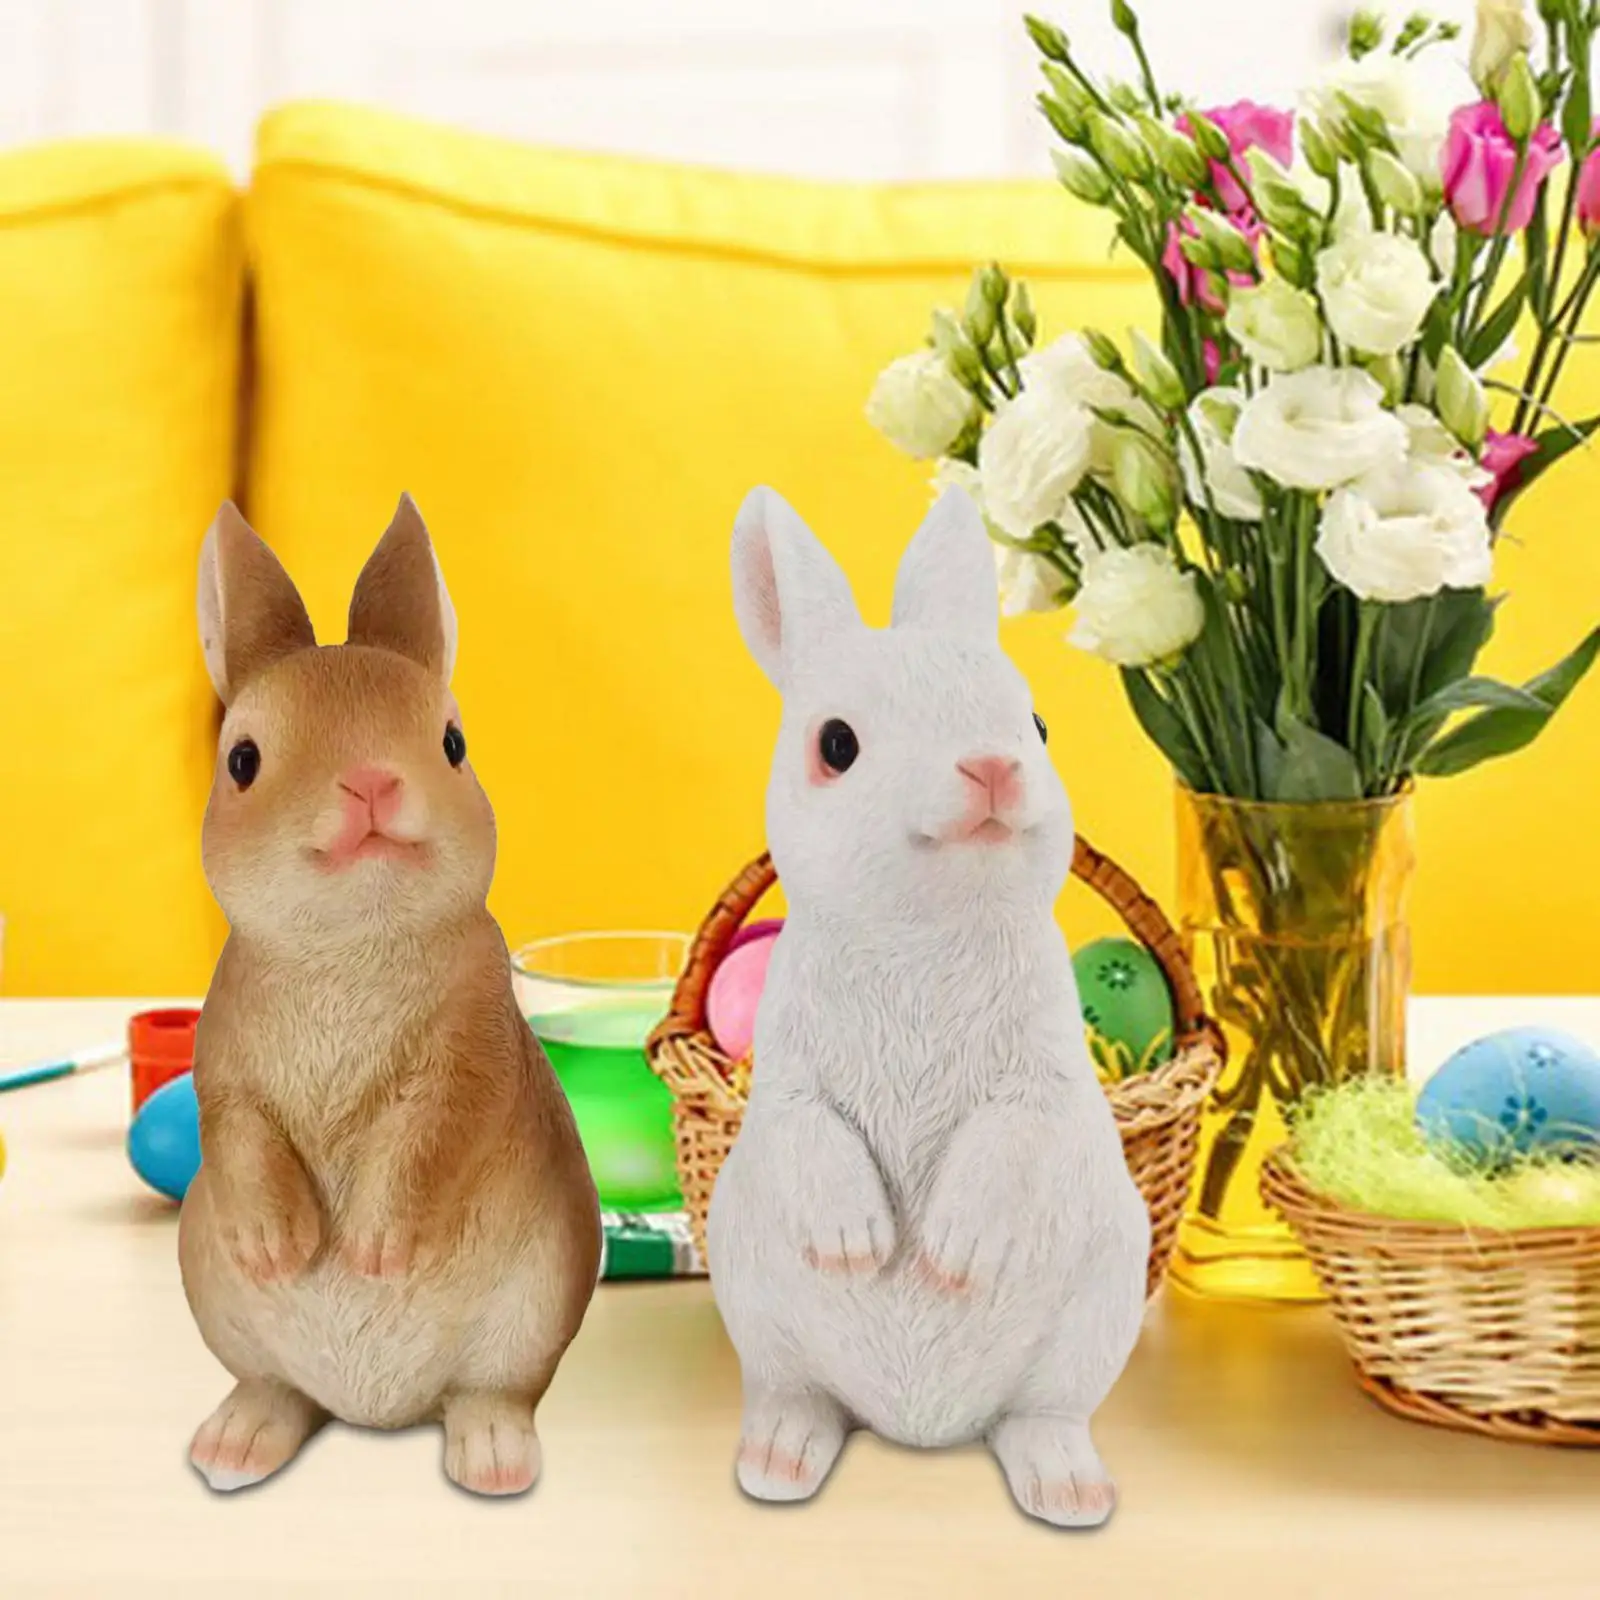 

2x Bunny Figurines Easter Decor Rabbit Small Desktop Ornaments Cute Resin Sculptures for Balcony Lawn Outside Outdoors Indoors